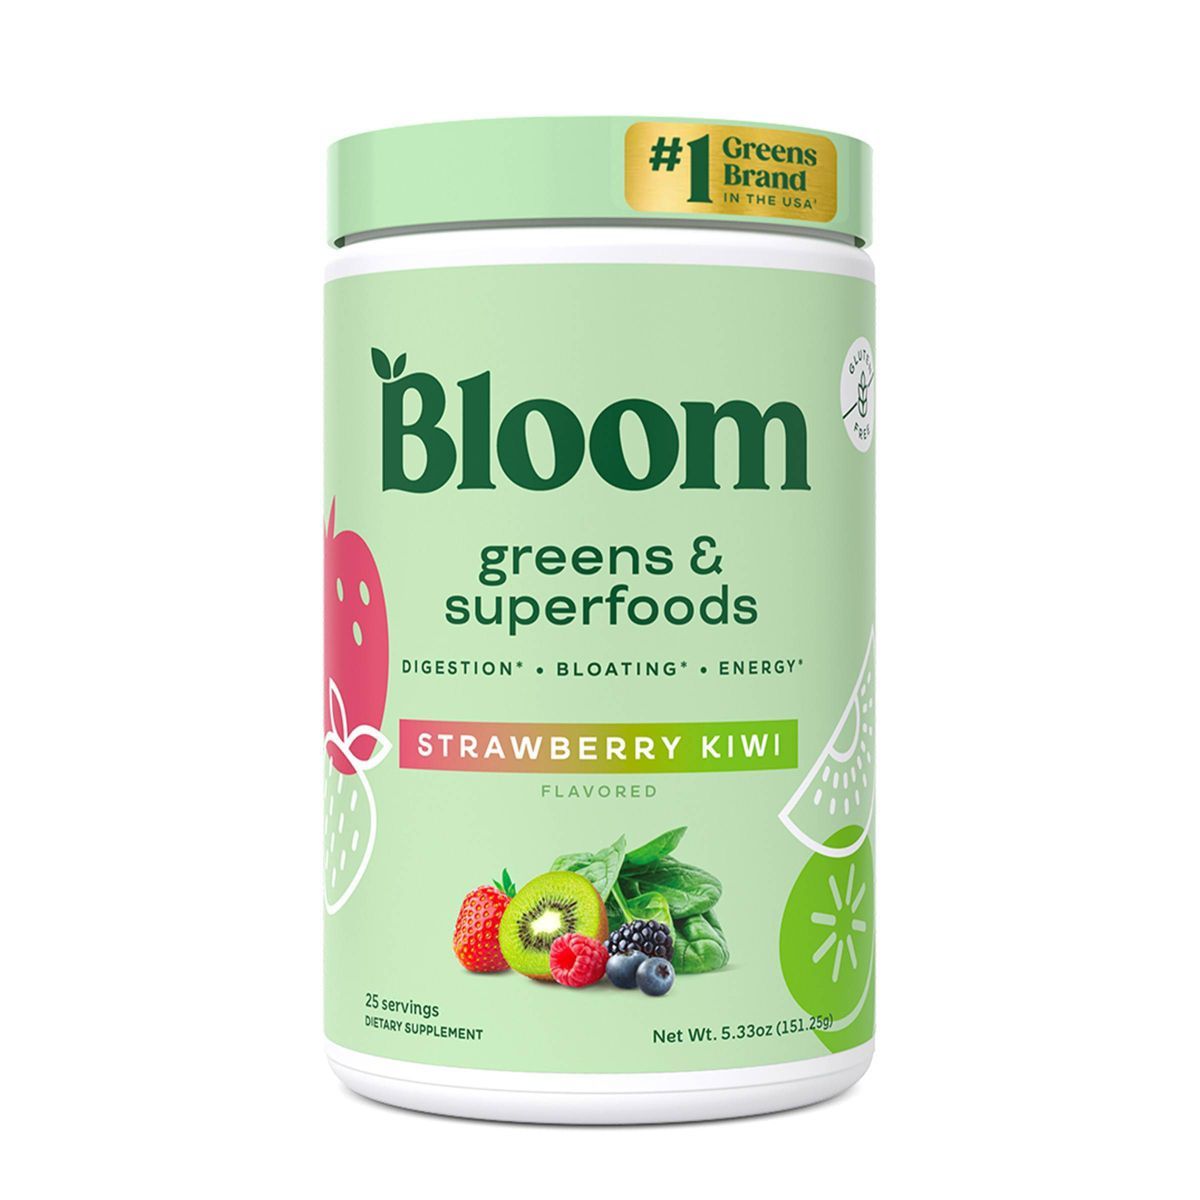 BLOOM NUTRITION Greens and Superfoods Powder - Strawberry Kiwi - 25 ct | Target